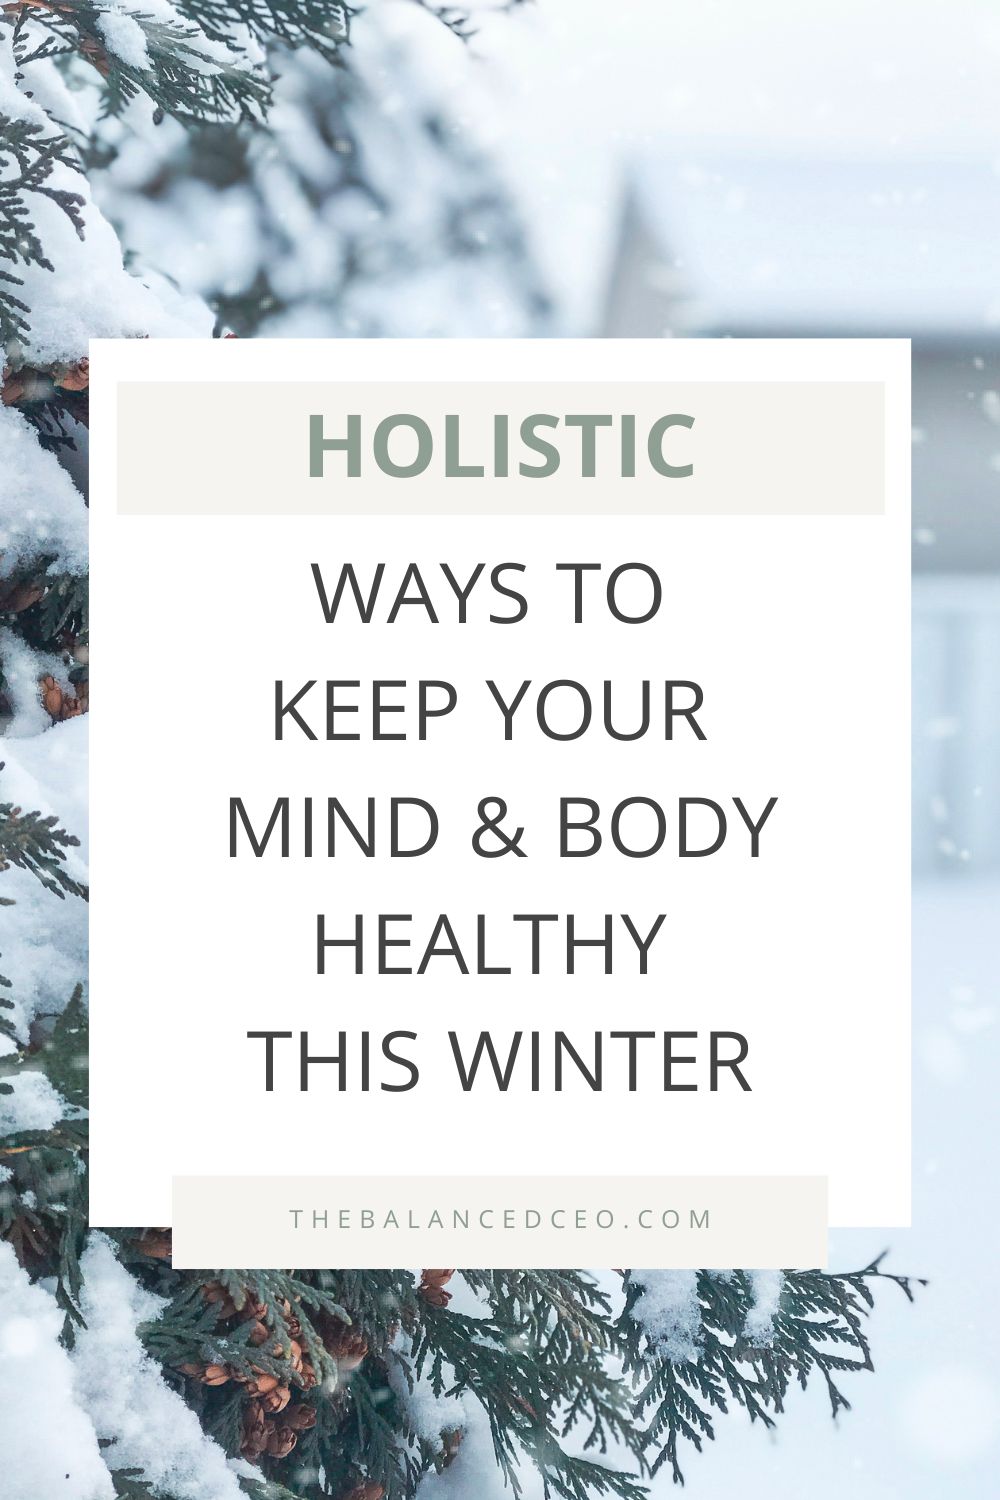 Holistic Ways to Keep Your Mind and Body Healthy This Winter